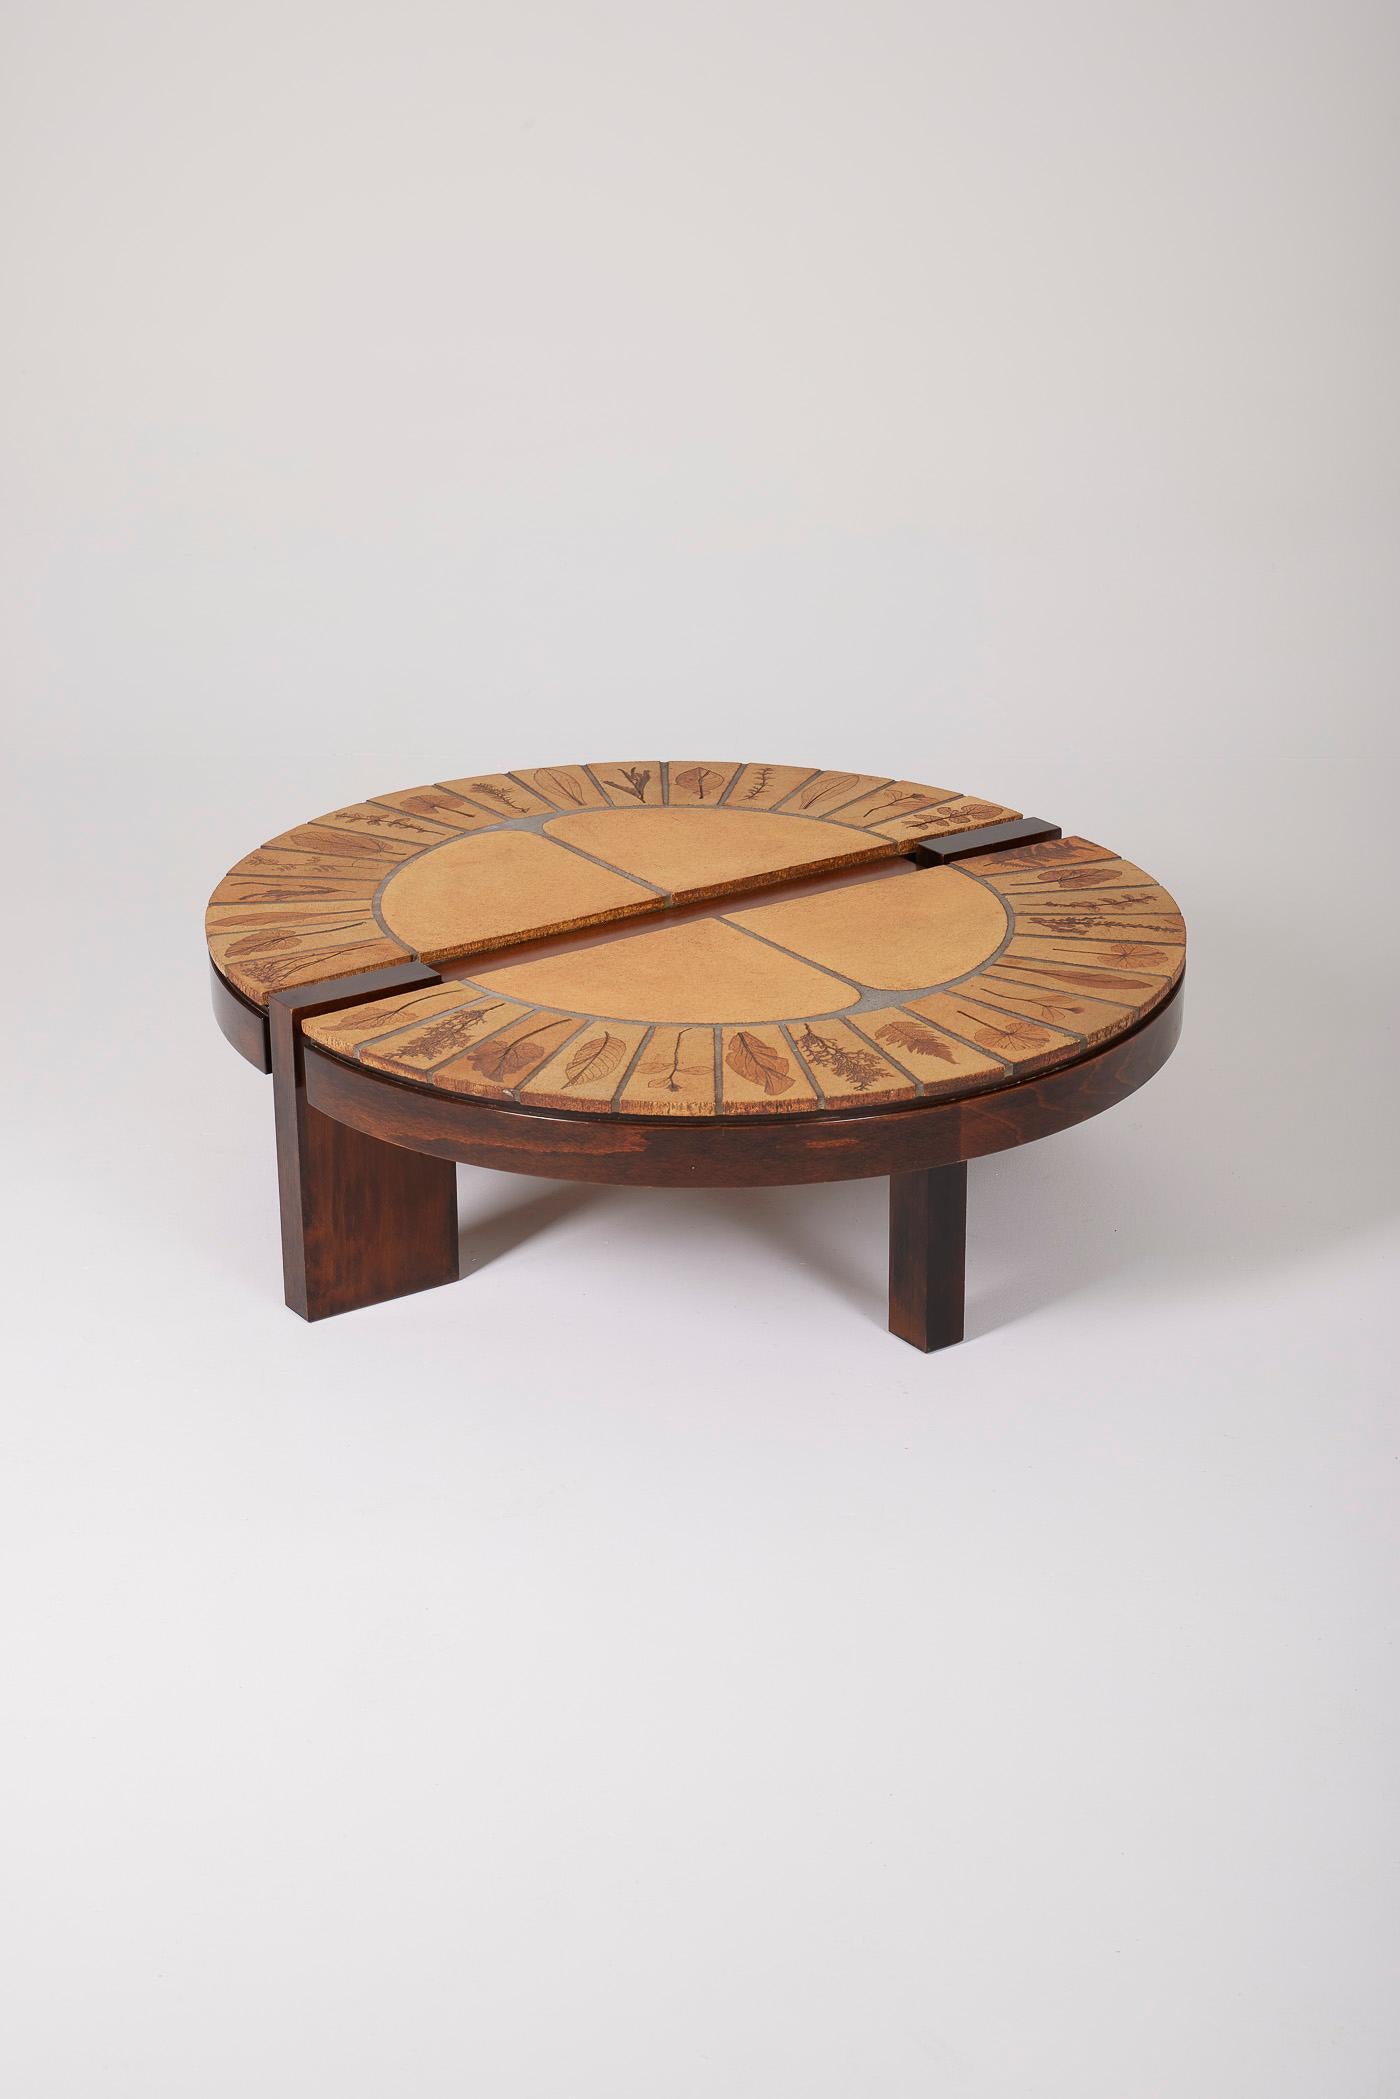 Coffee table by ceramicist Roger Capron from the 1960s. The top is ceramic with a signed R. Capron herbarium motif. The structure is wood. In very good condition.
LP1145